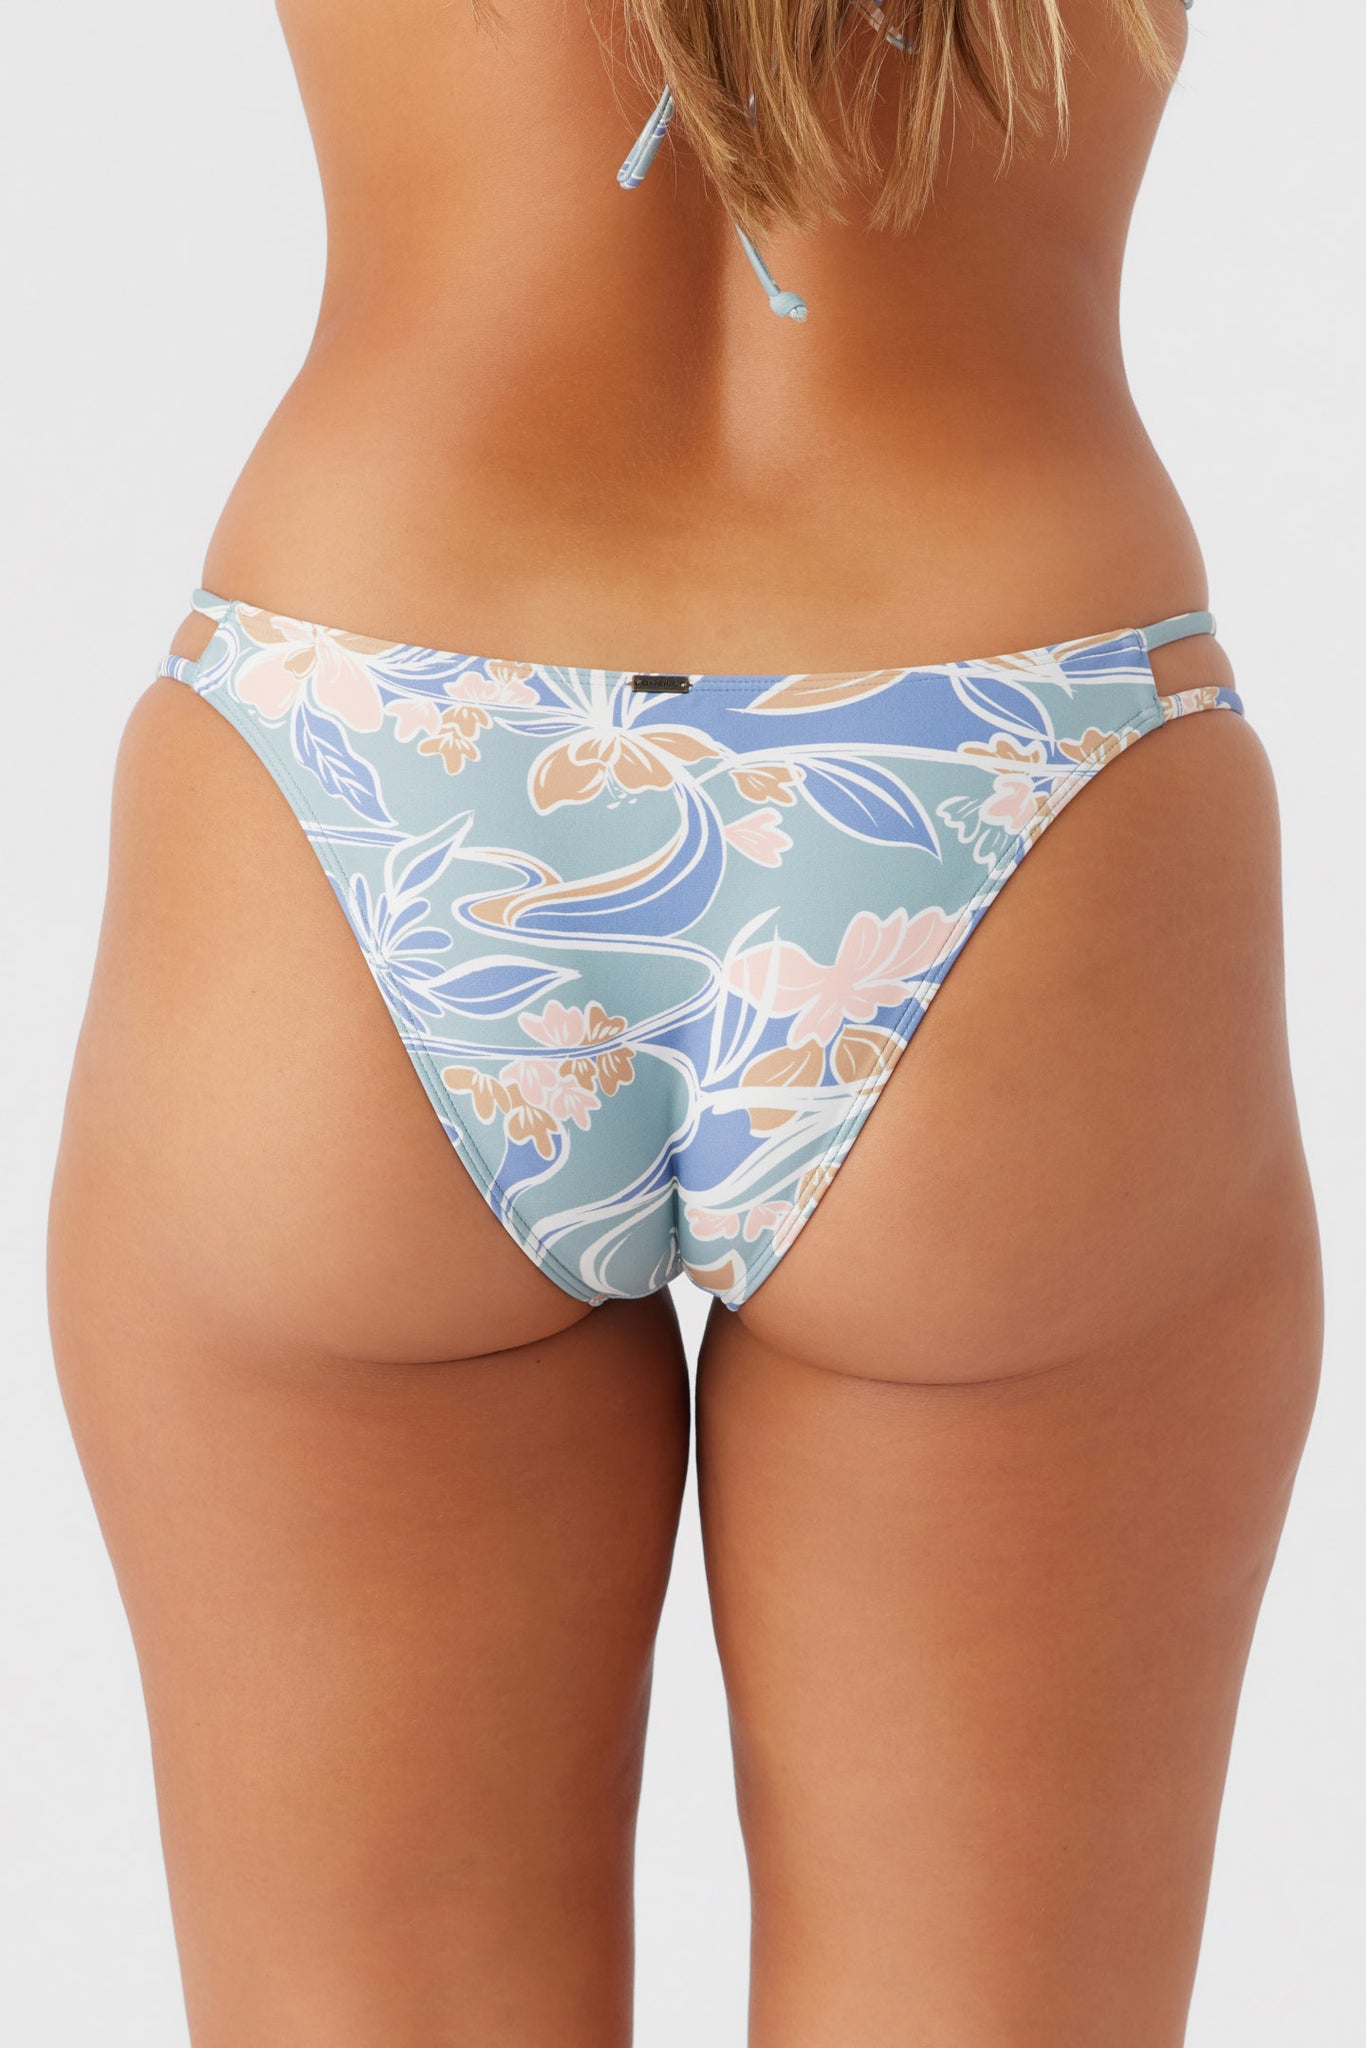 EMMY FLORAL CARDIFF CHEEKY BOTTOMS